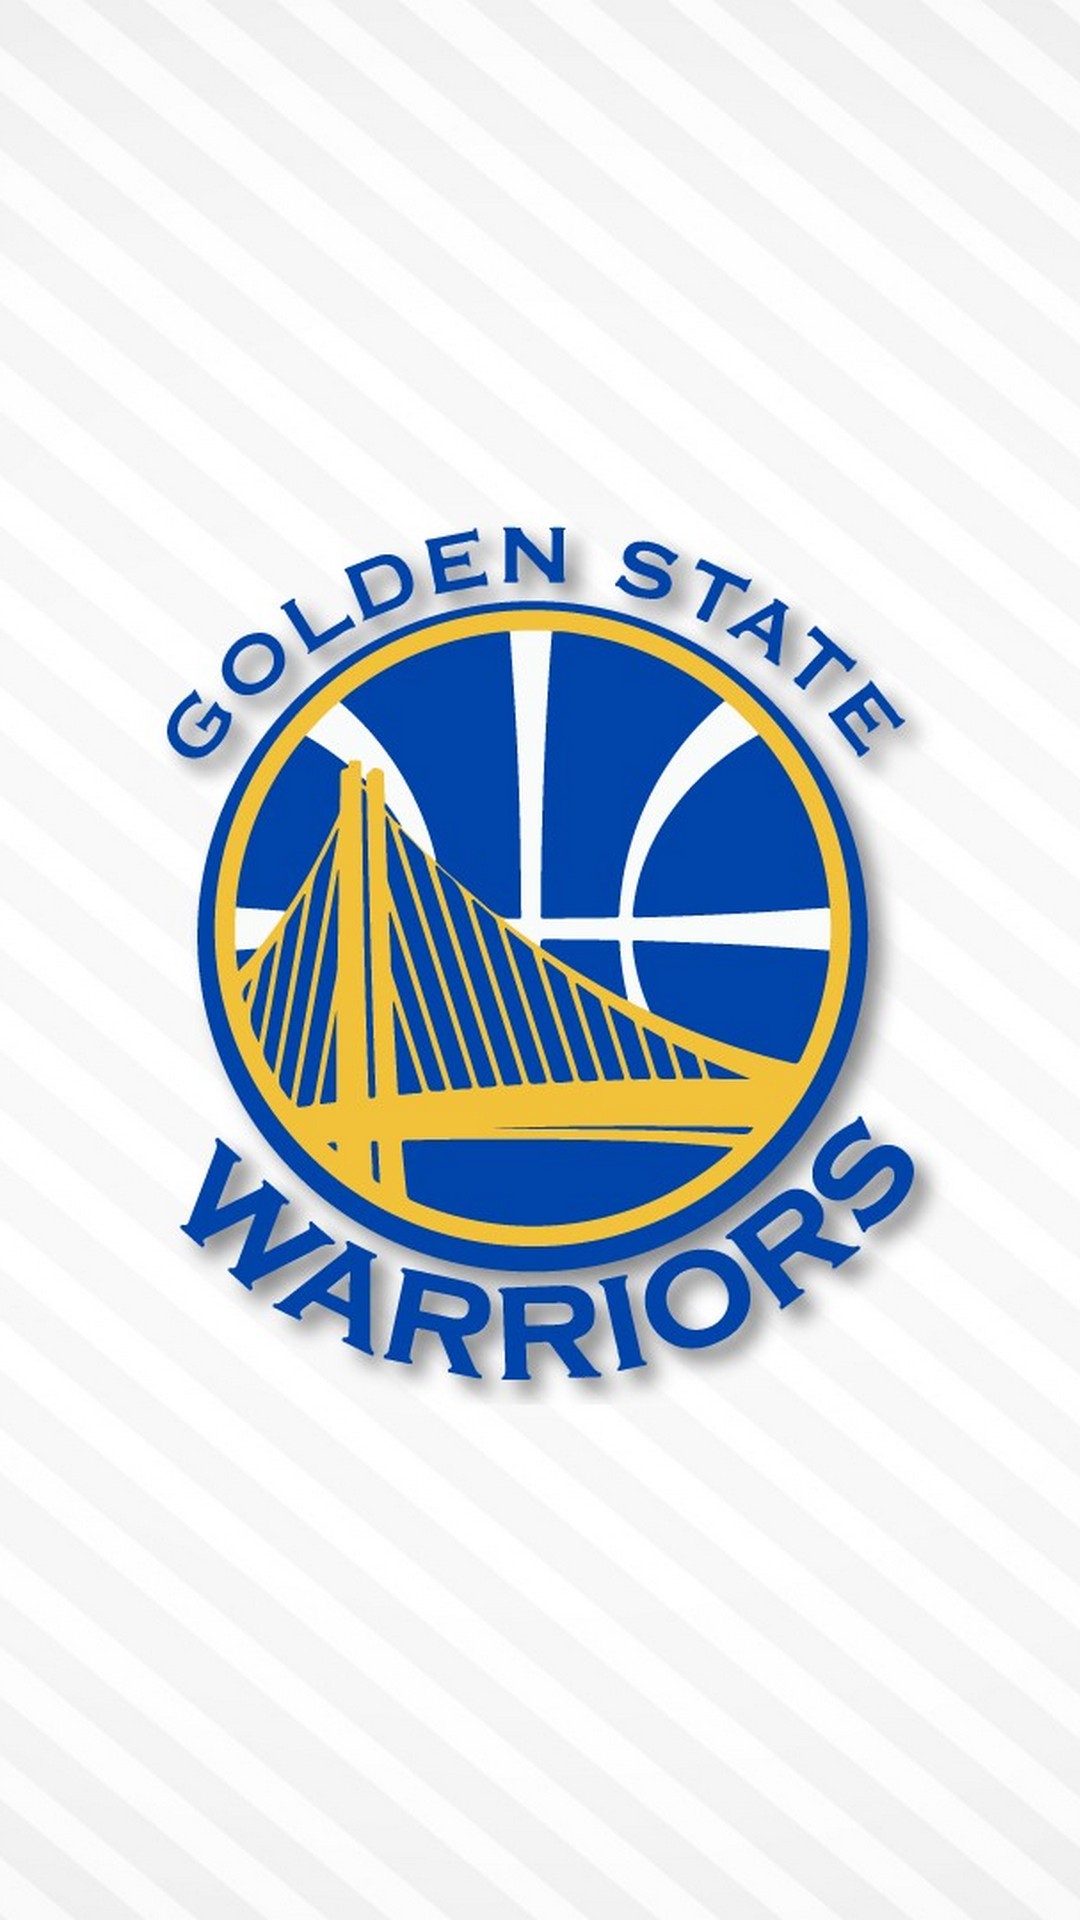 Golden State Warriors iPhone Wallpapers with image resolution 1080x1920 pixel. You can use this wallpaper as background for your desktop Computer Screensavers, Android or iPhone smartphones